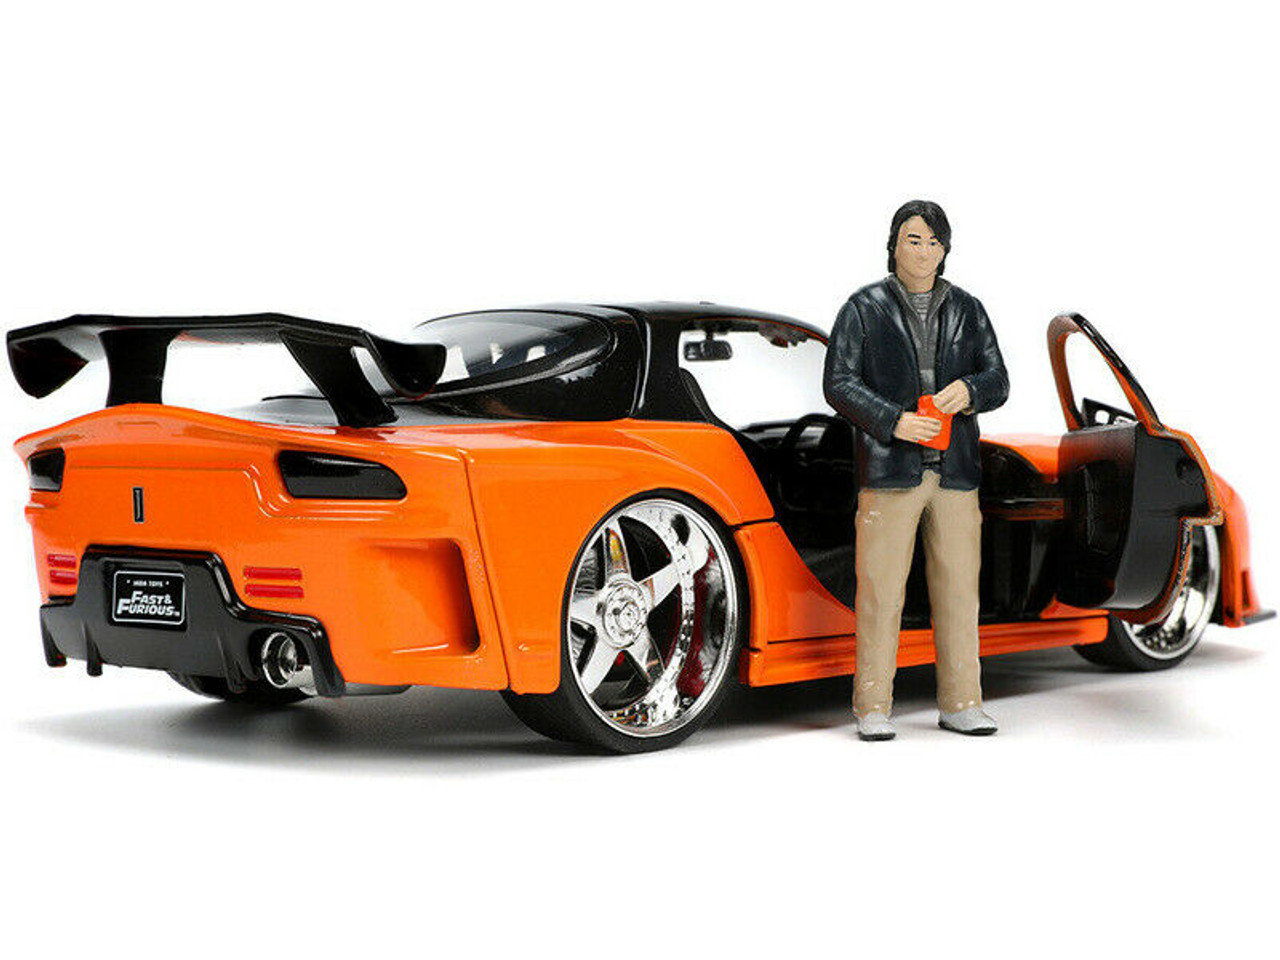 1/24 Jada 1995 Mazda RX-7 Widebody RHD (Right Hand Drive) Orange Metallic and Black with Han Diecast Figurine "The Fast and the Furious: Tokyo Drift" (2006) Movie Diecast Model Car